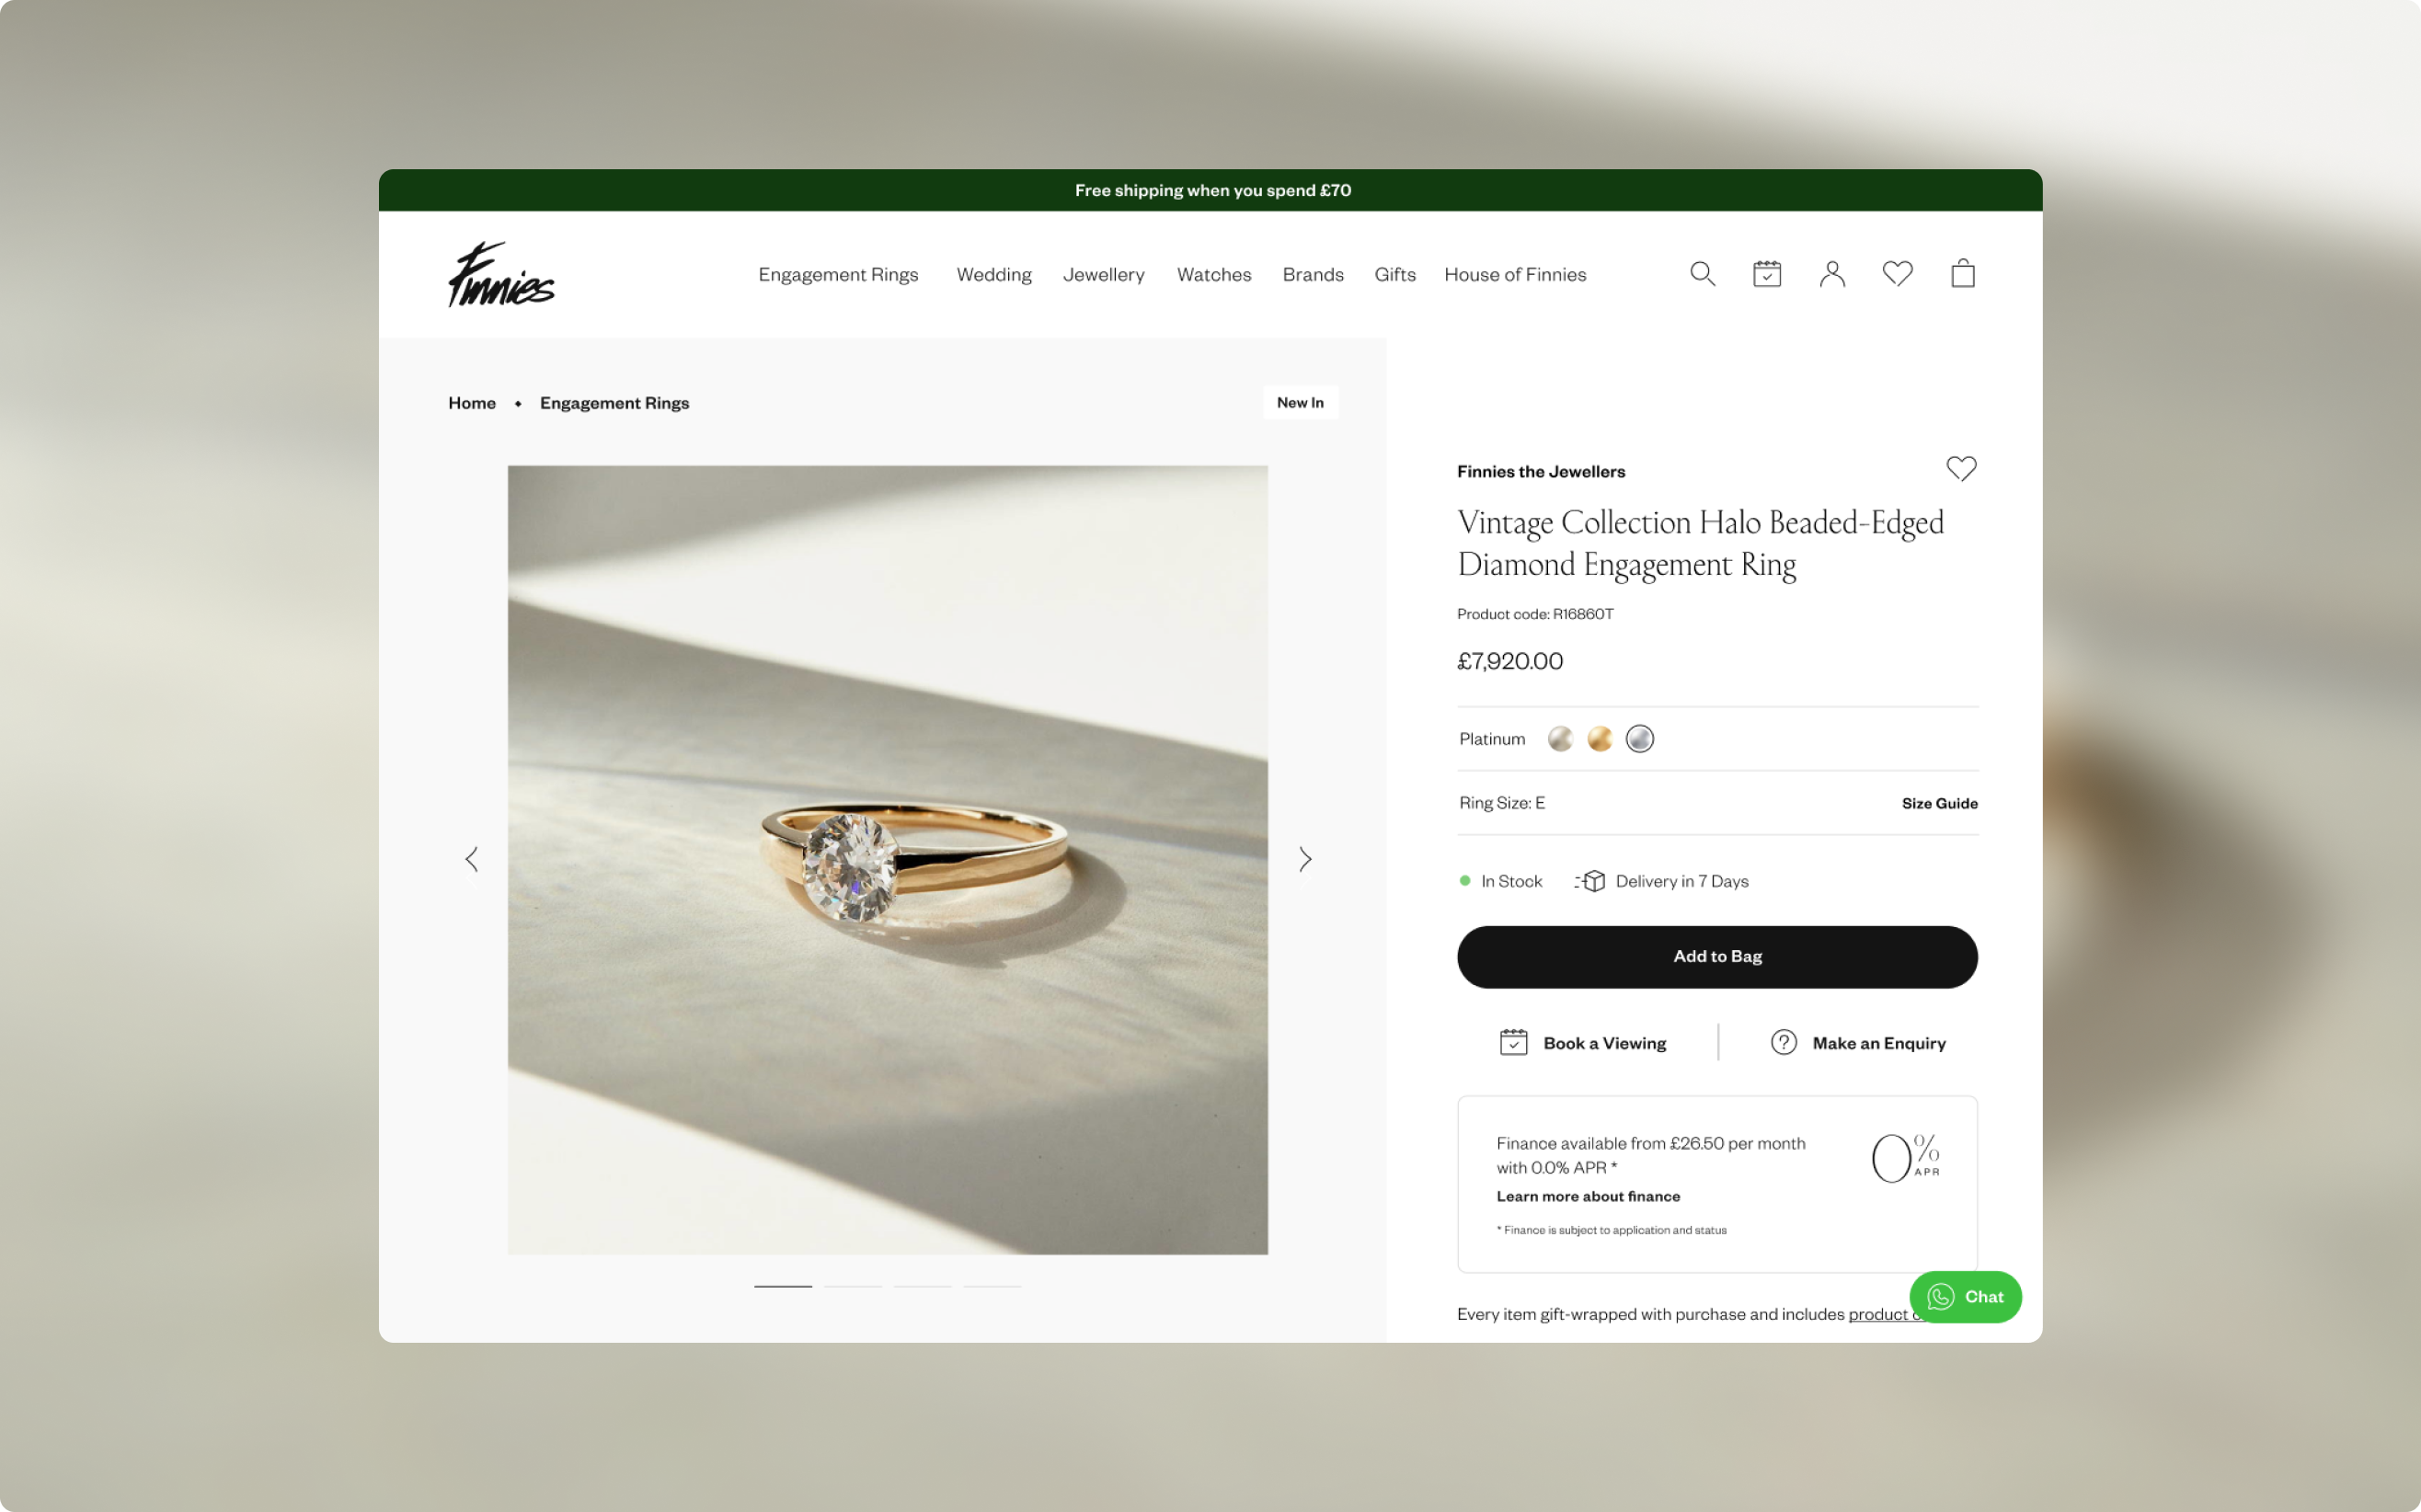 Finnies Product Detail page showing Diamond Engagement ring